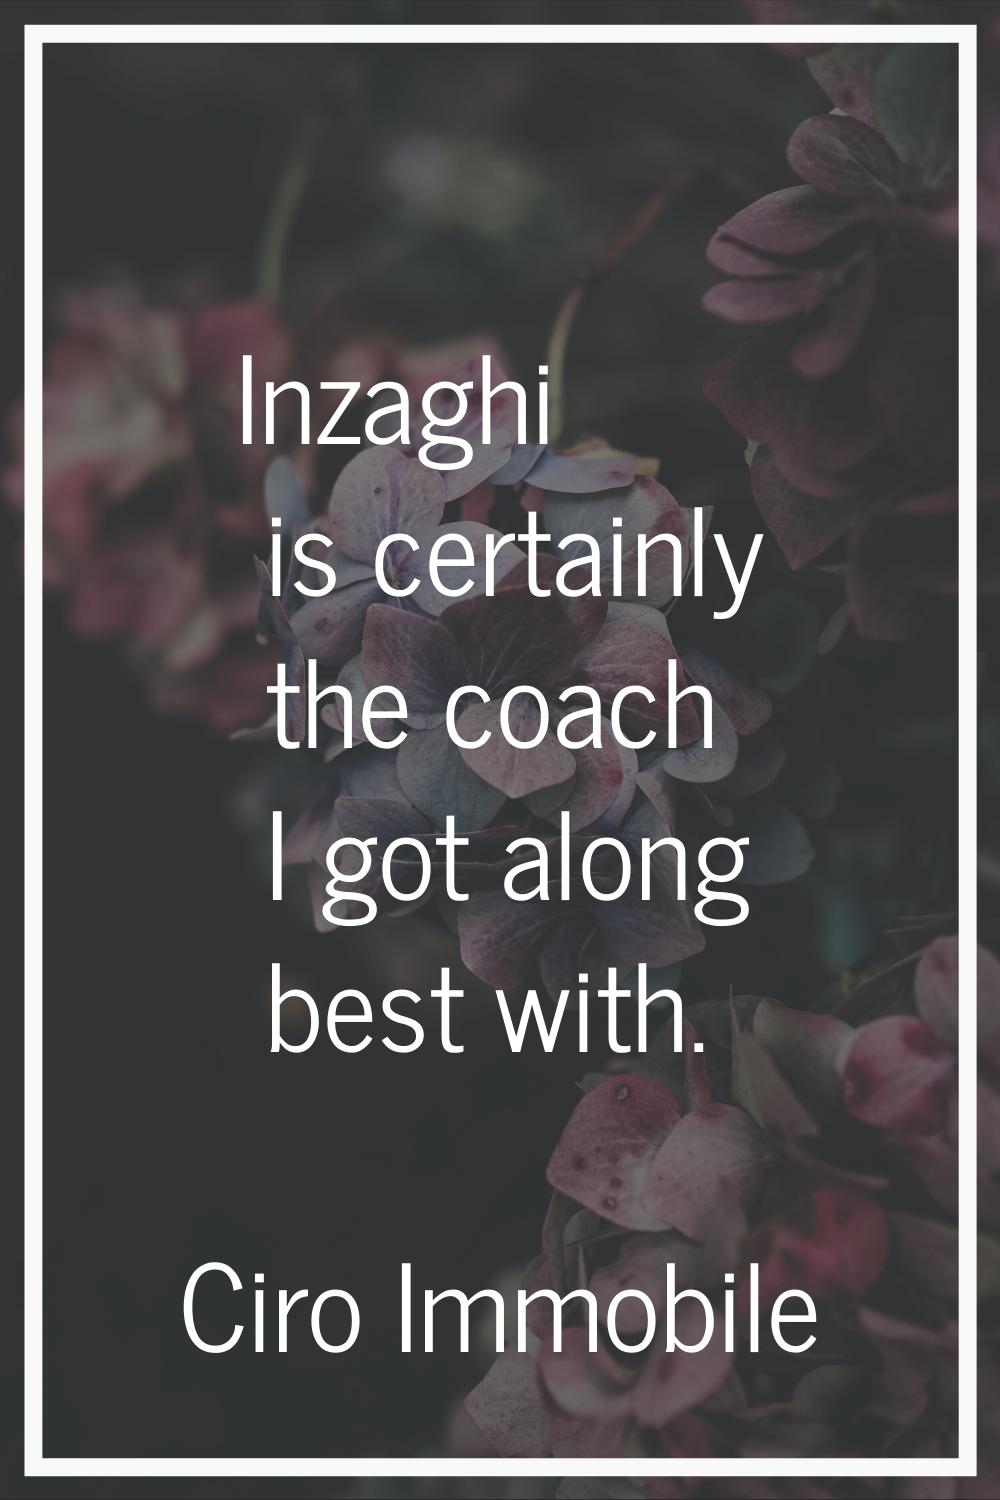 Inzaghi is certainly the coach I got along best with.